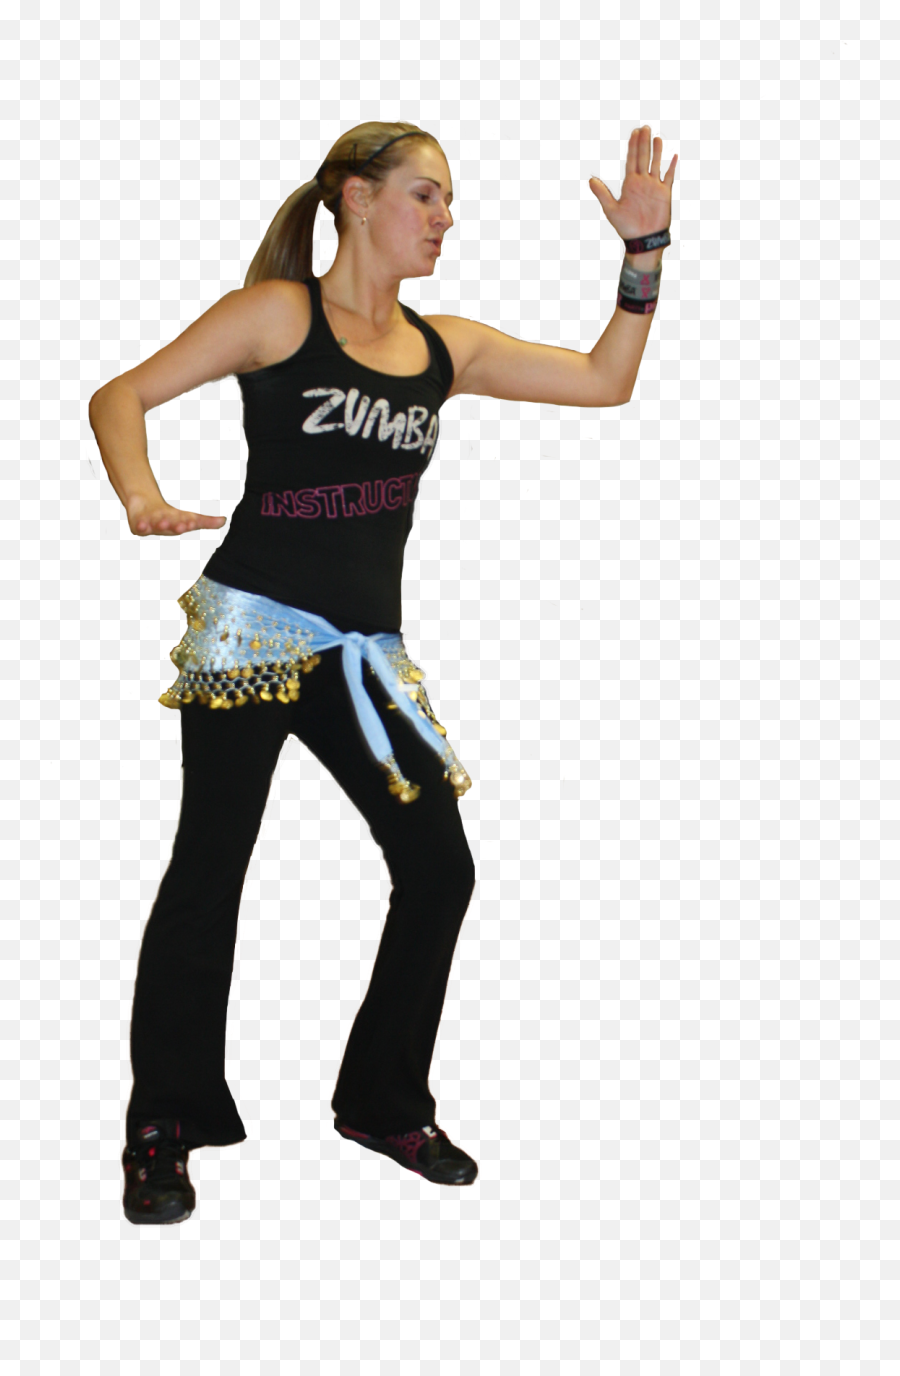 Download Zumba - Png Full Size Png Image Pngkit Turn,Zumba Png